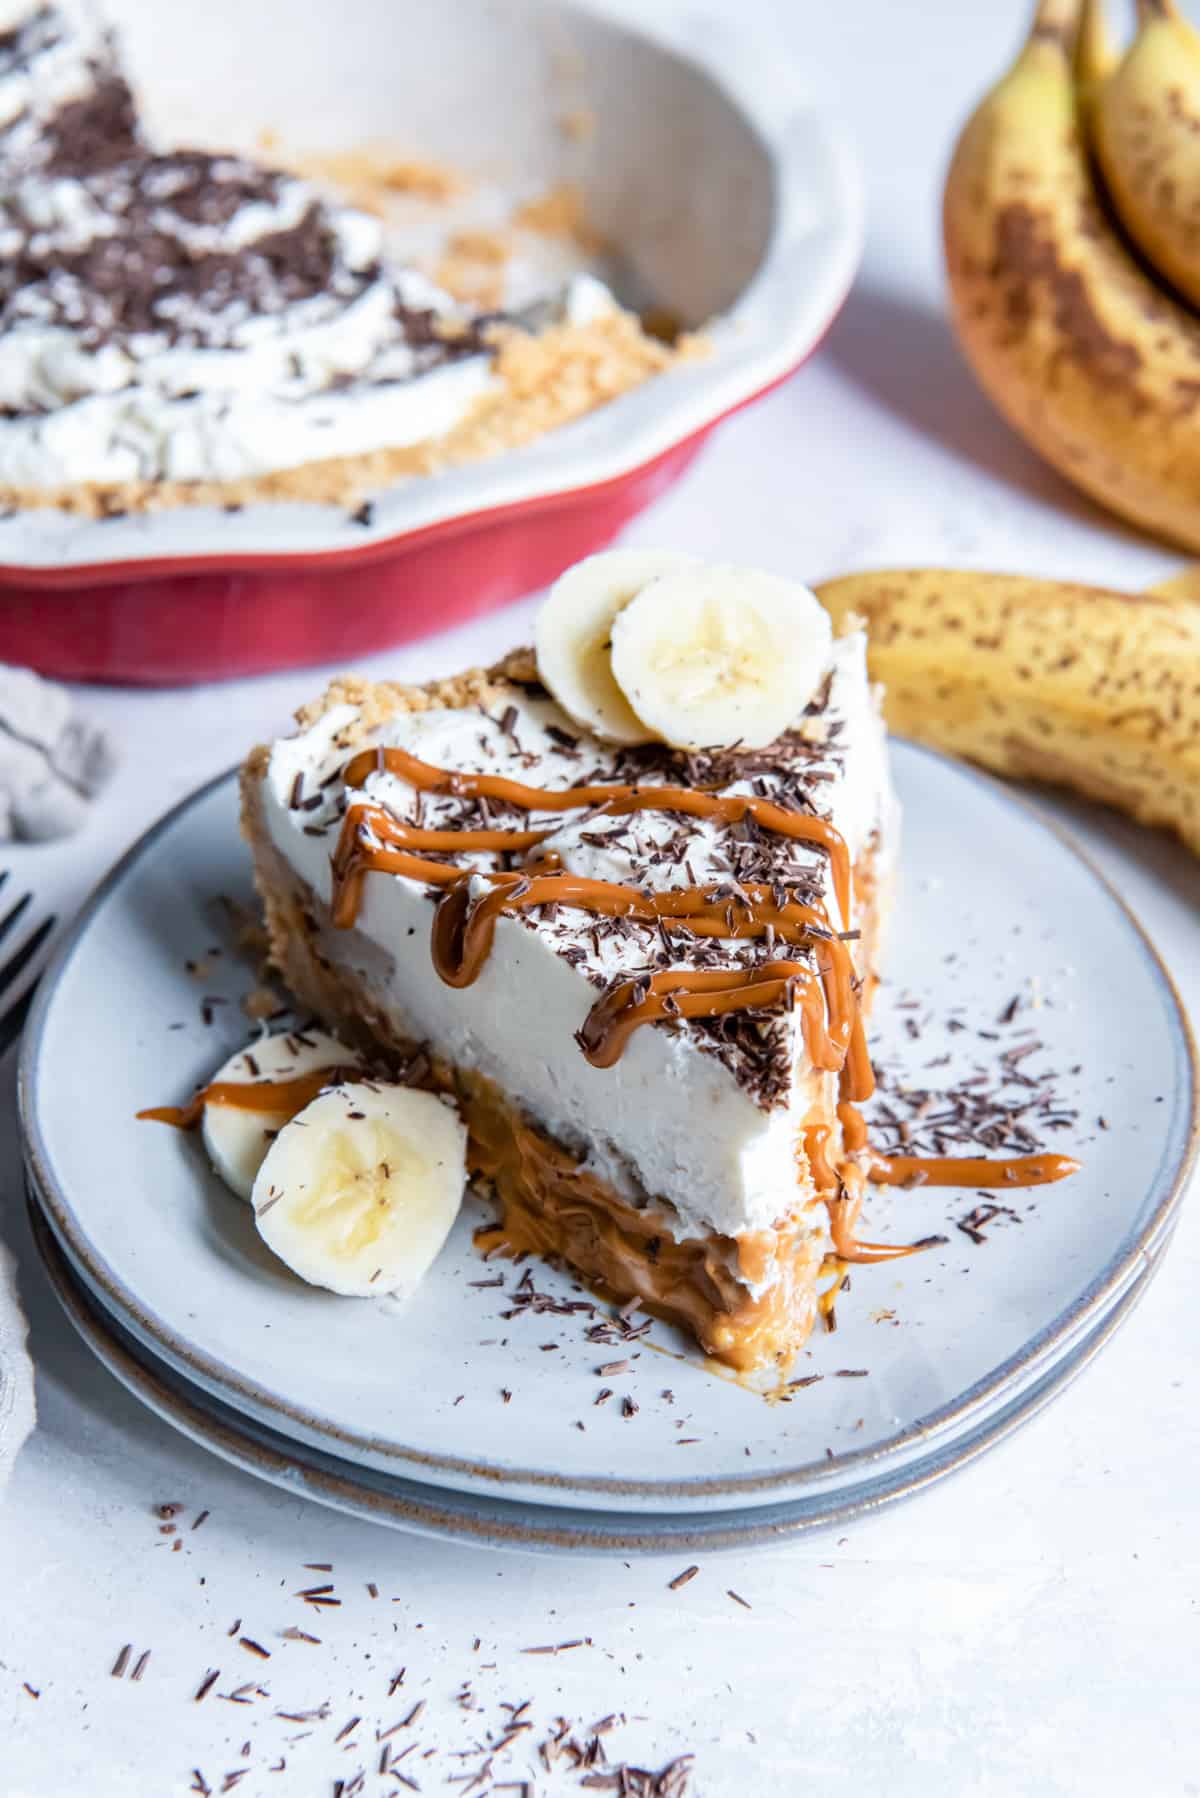 slice of banana toffee pie on a plate